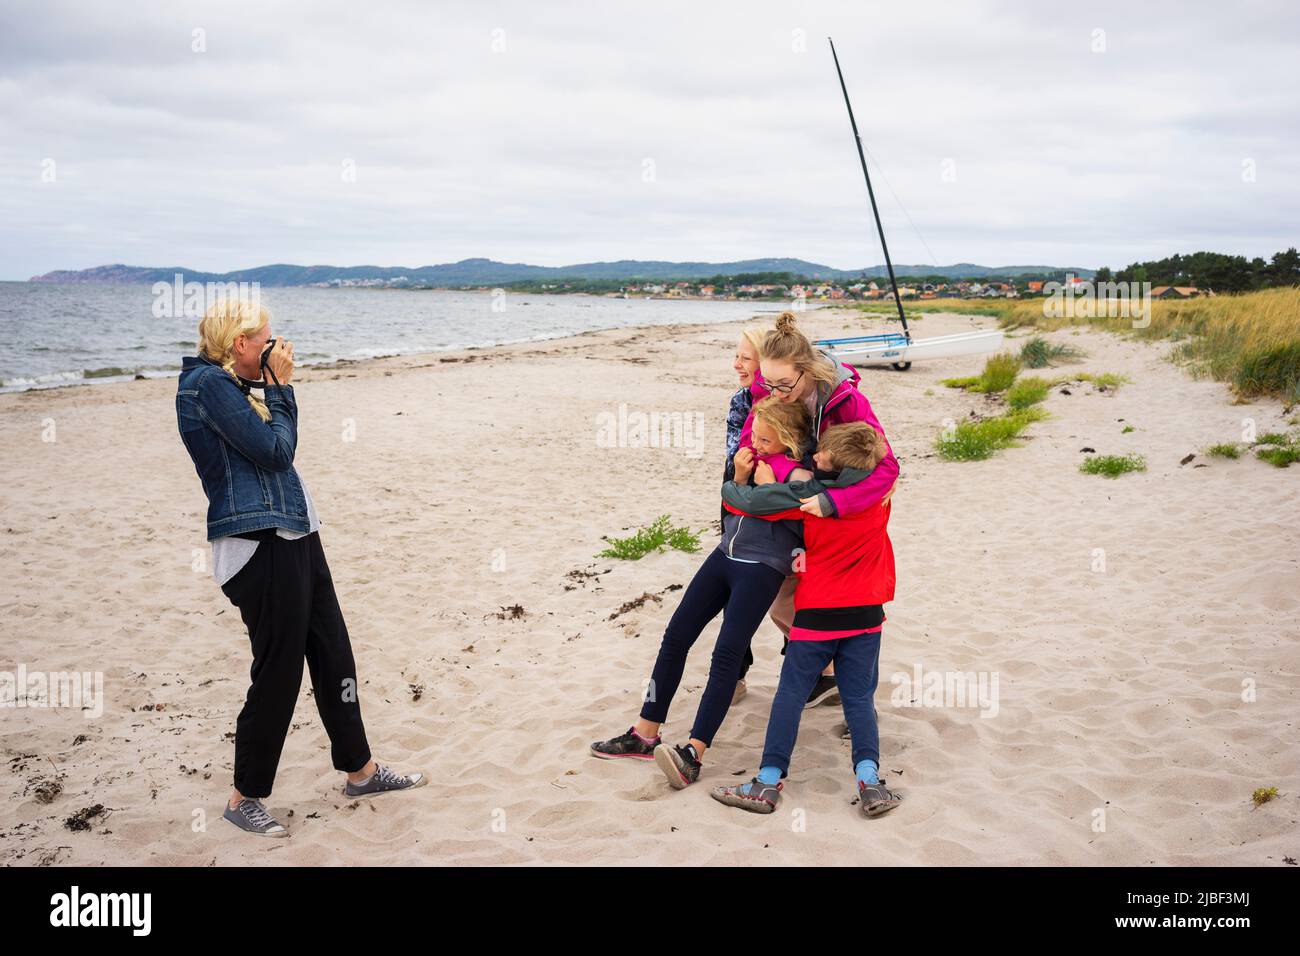 Woman photographing her children on beach Stock Photo